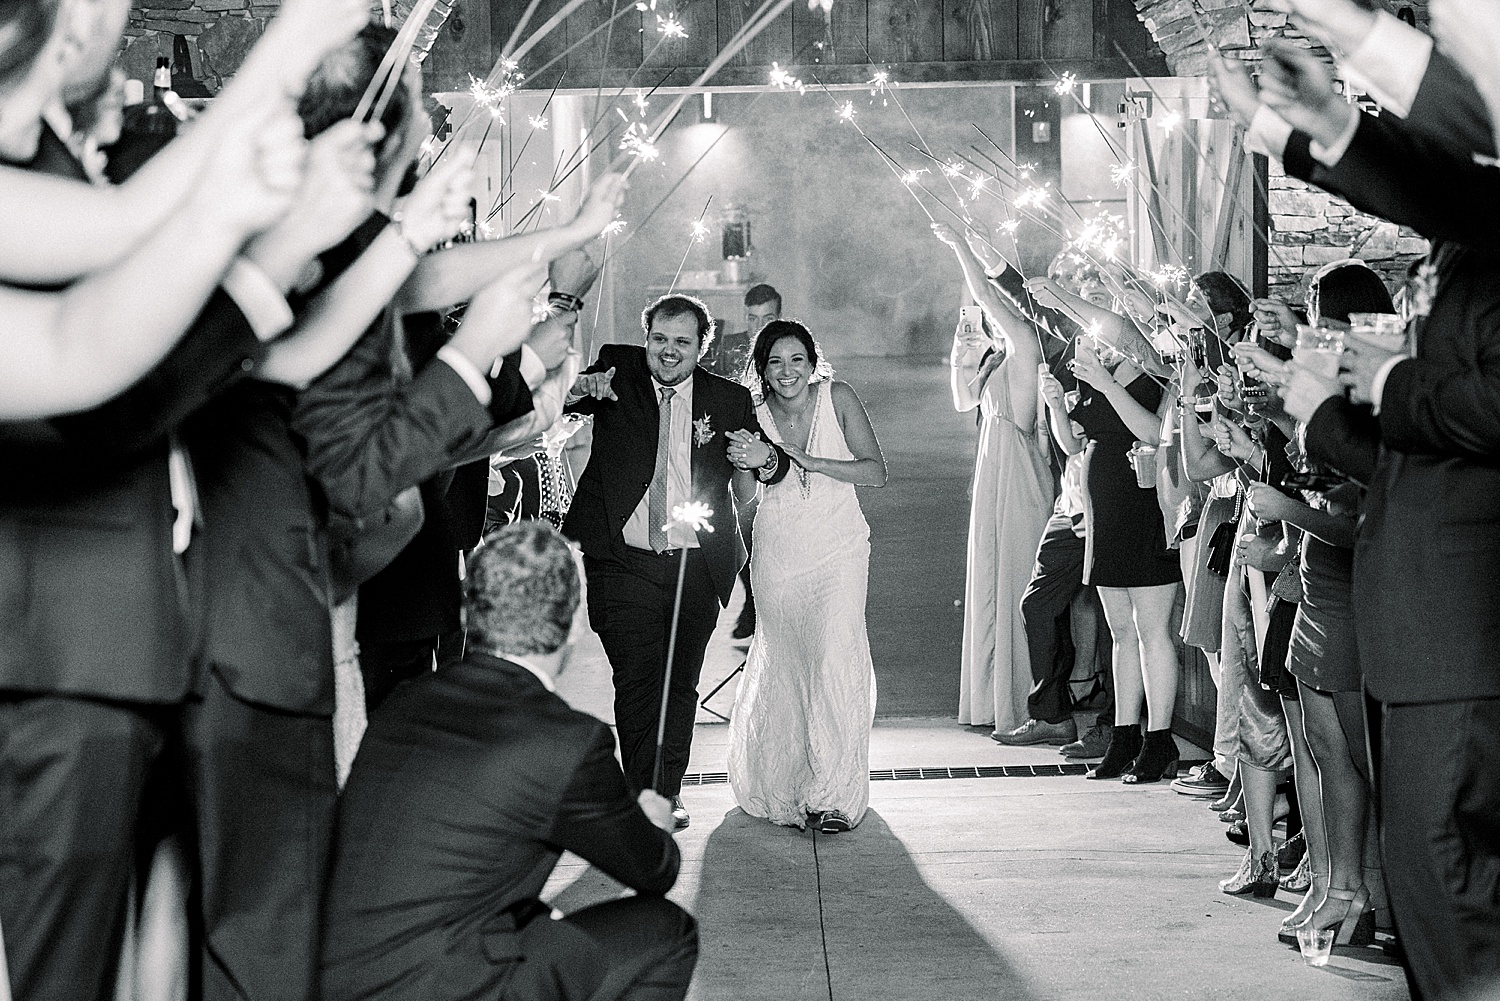 Guests hold sparklers to celebrate newlyweds at the end of wedding night at Park Crest Events in AL